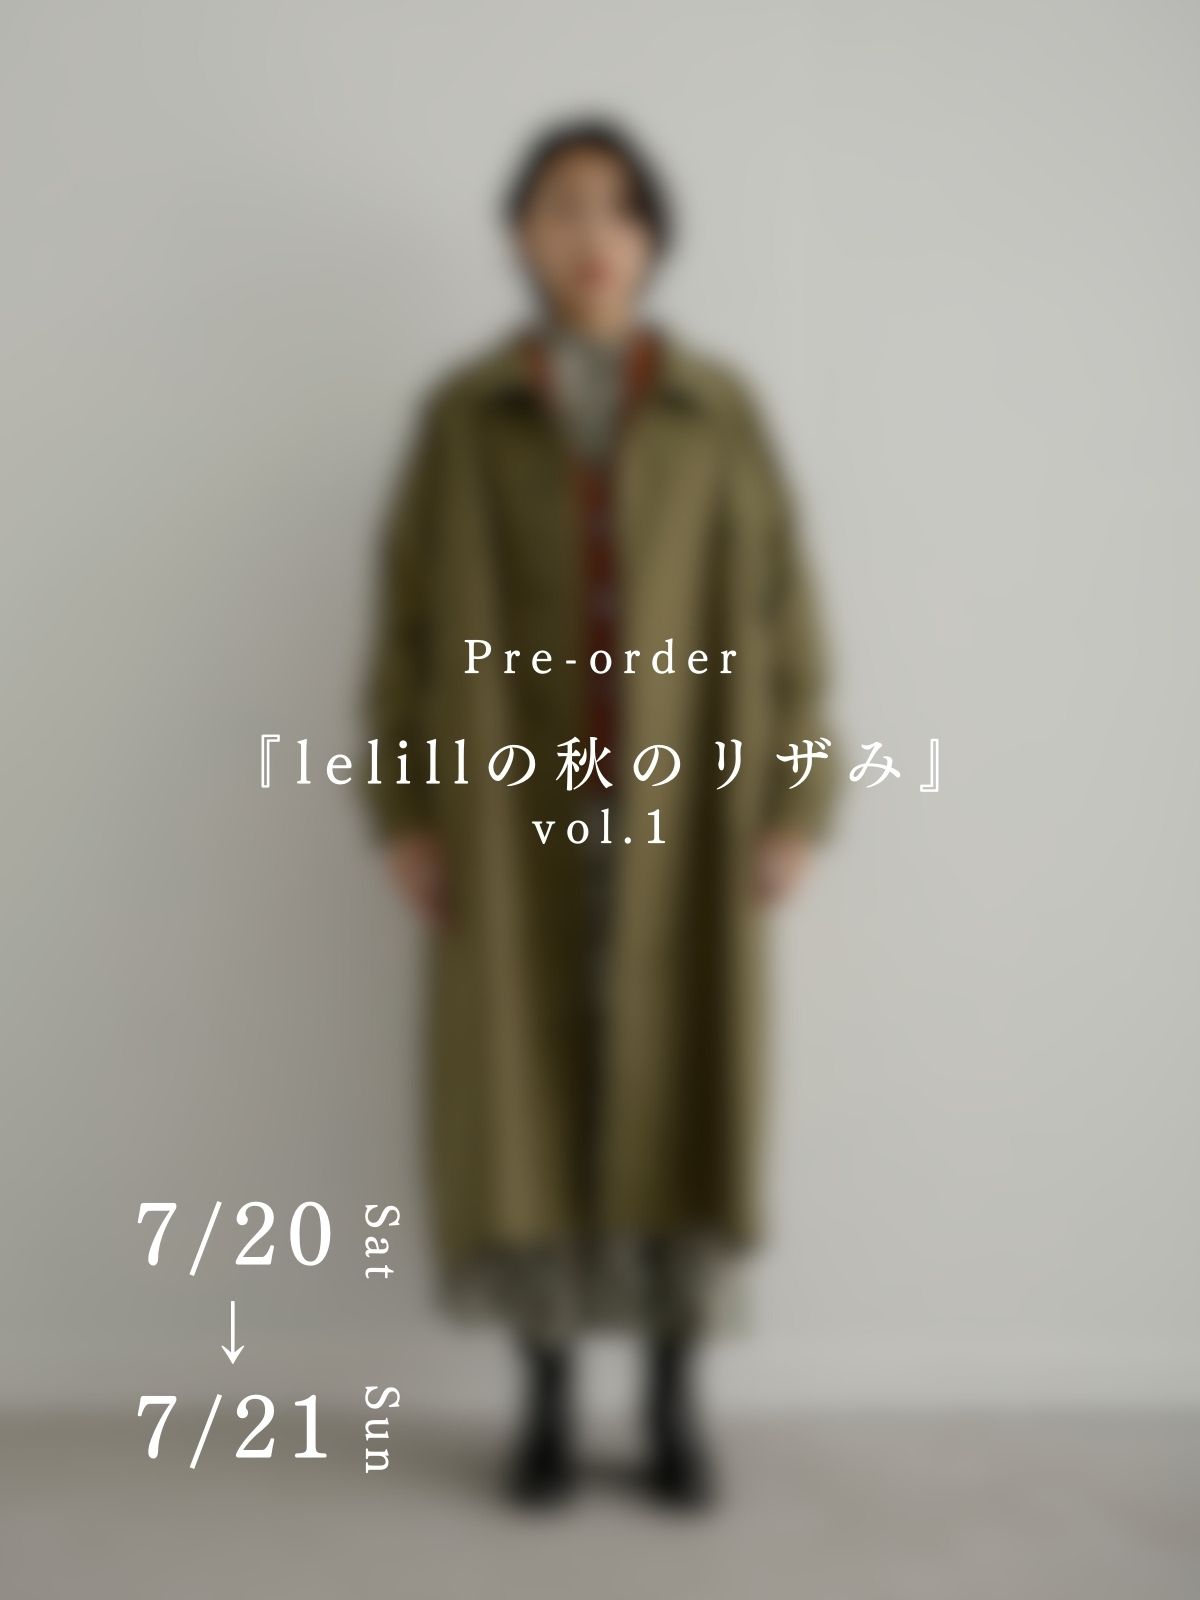 SPECIAL EVENT｜PRE-ORDER ｜『lelillの秋のリザみ vol.1 』at lelill showroom 広尾